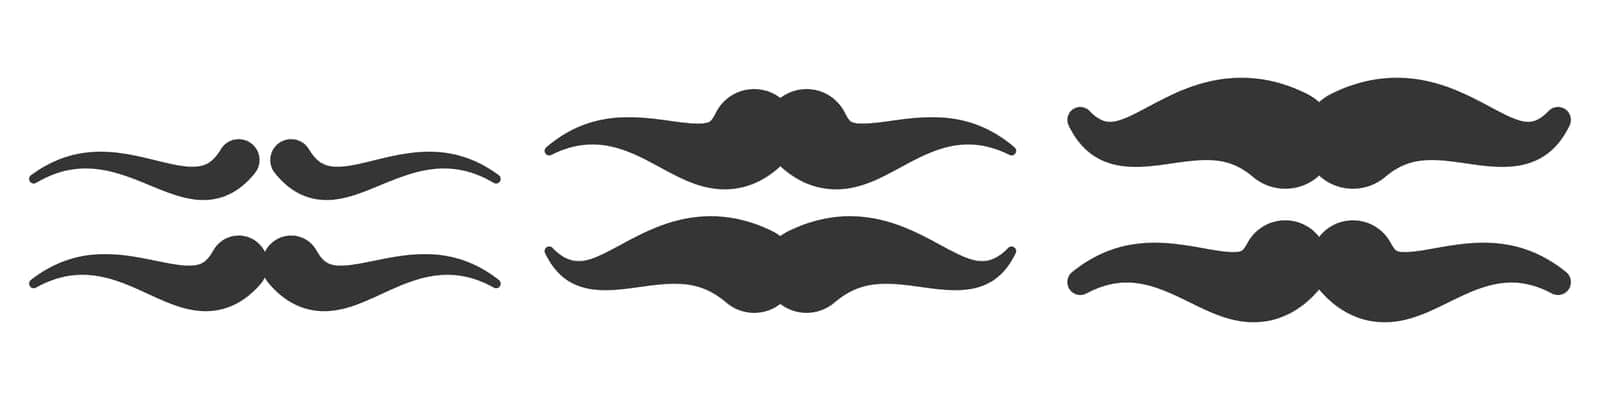 Set of vector Mustache icons. Black silhouettes of hipster Mustaches. Mustaches for party.